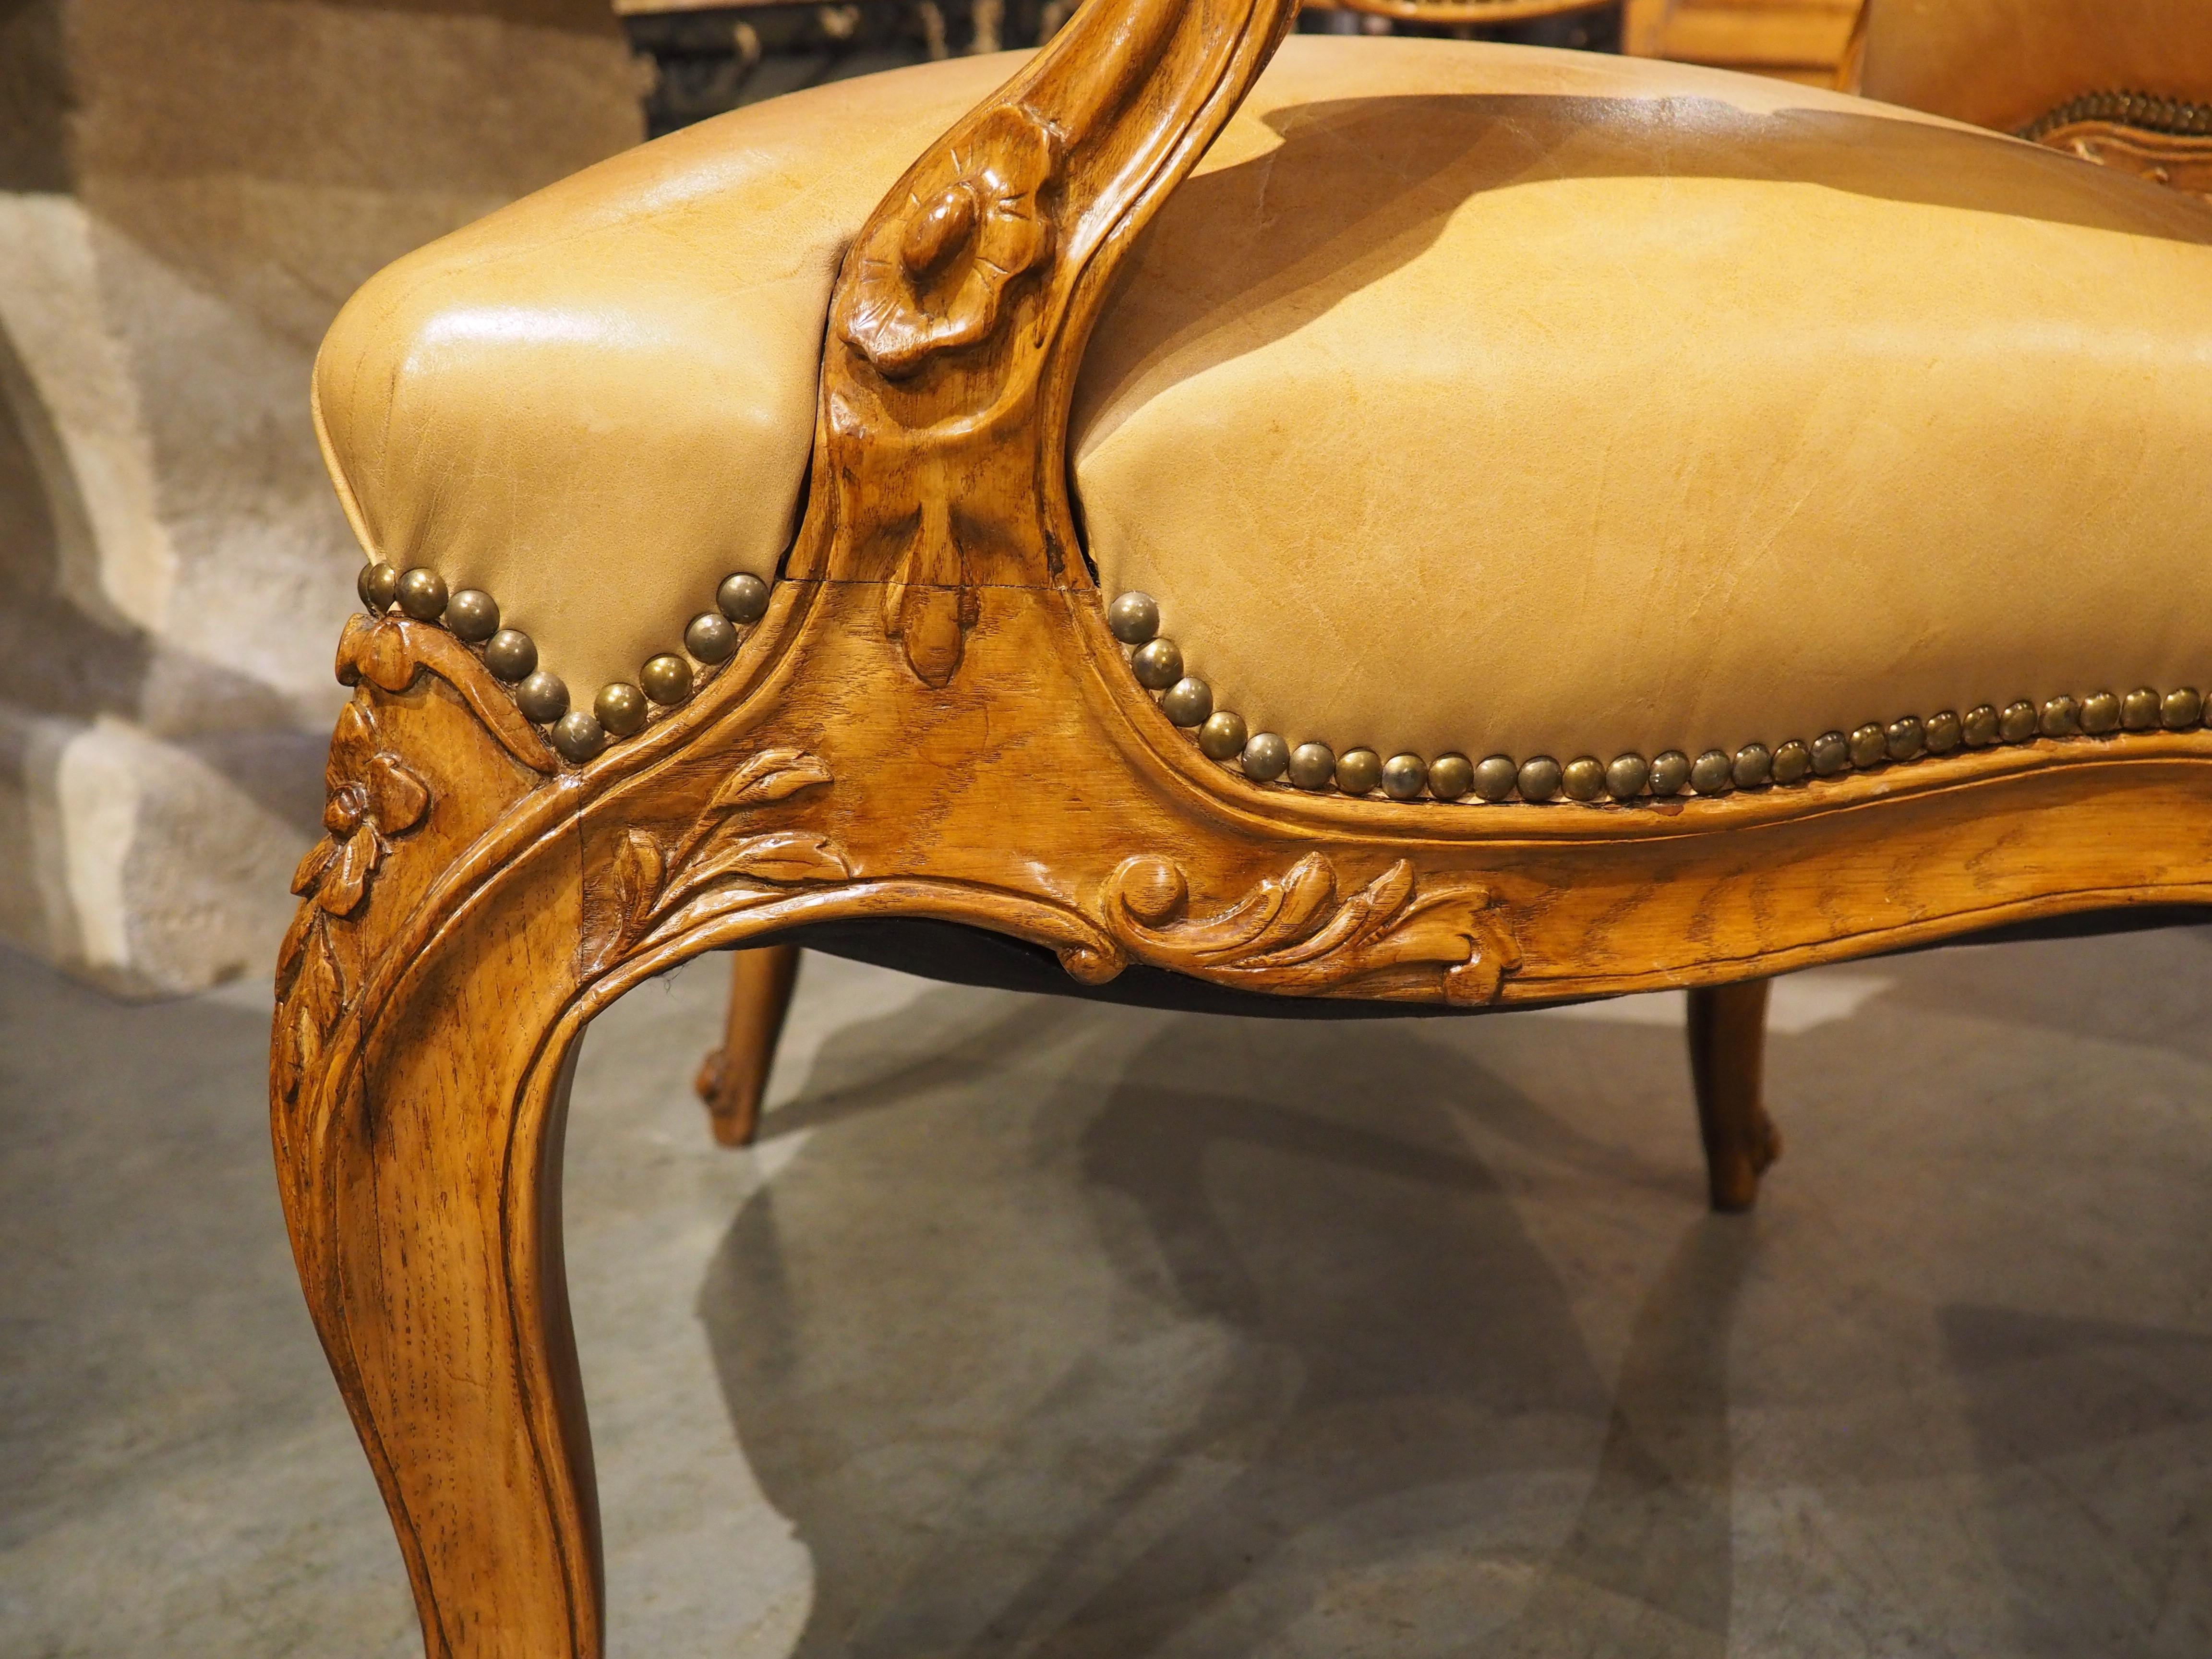 Pair of French Carved Regence Style Armchairs with Leather Upholstery, C. 1900 For Sale 4